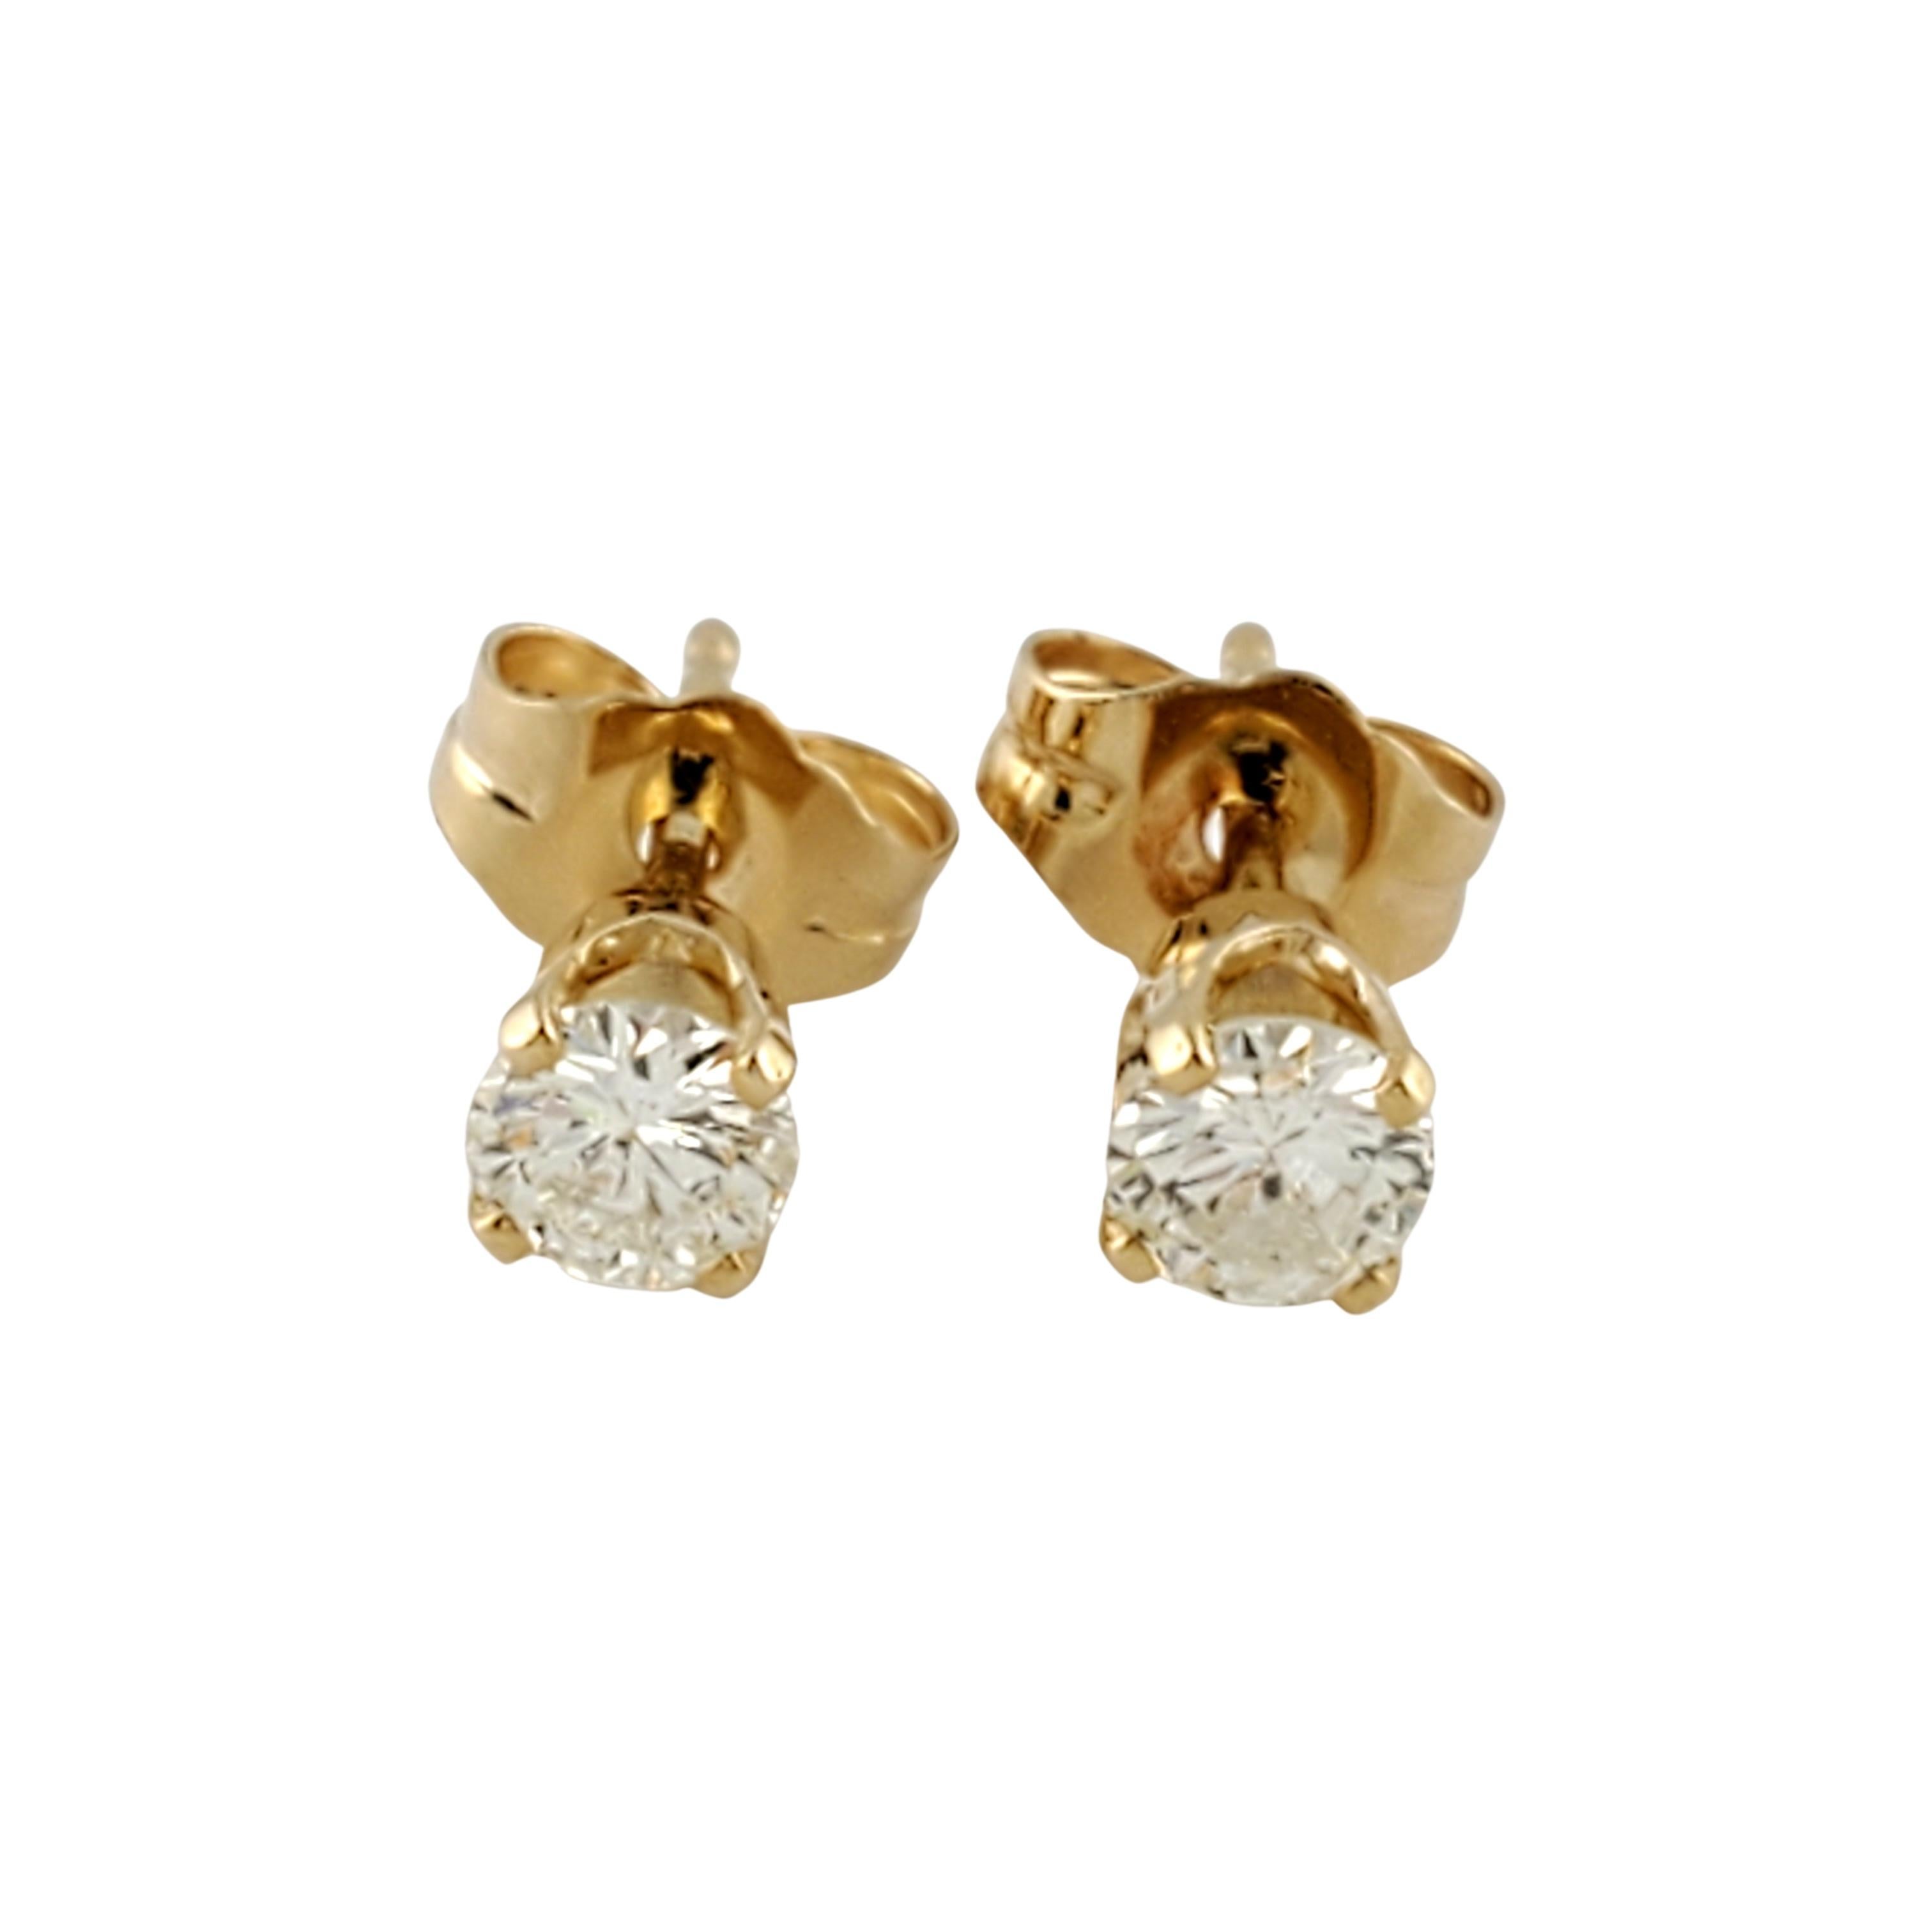 14 Karat Yellow Gold Diamond Stud Earrings .40 ct. twt.-

These sparkling earrings each feature one round brilliant cut diamond set in classic 14K yellow gold.  Push back closures.

Approximate total diamond weight:  .40 ct.

Diamond clarity: 